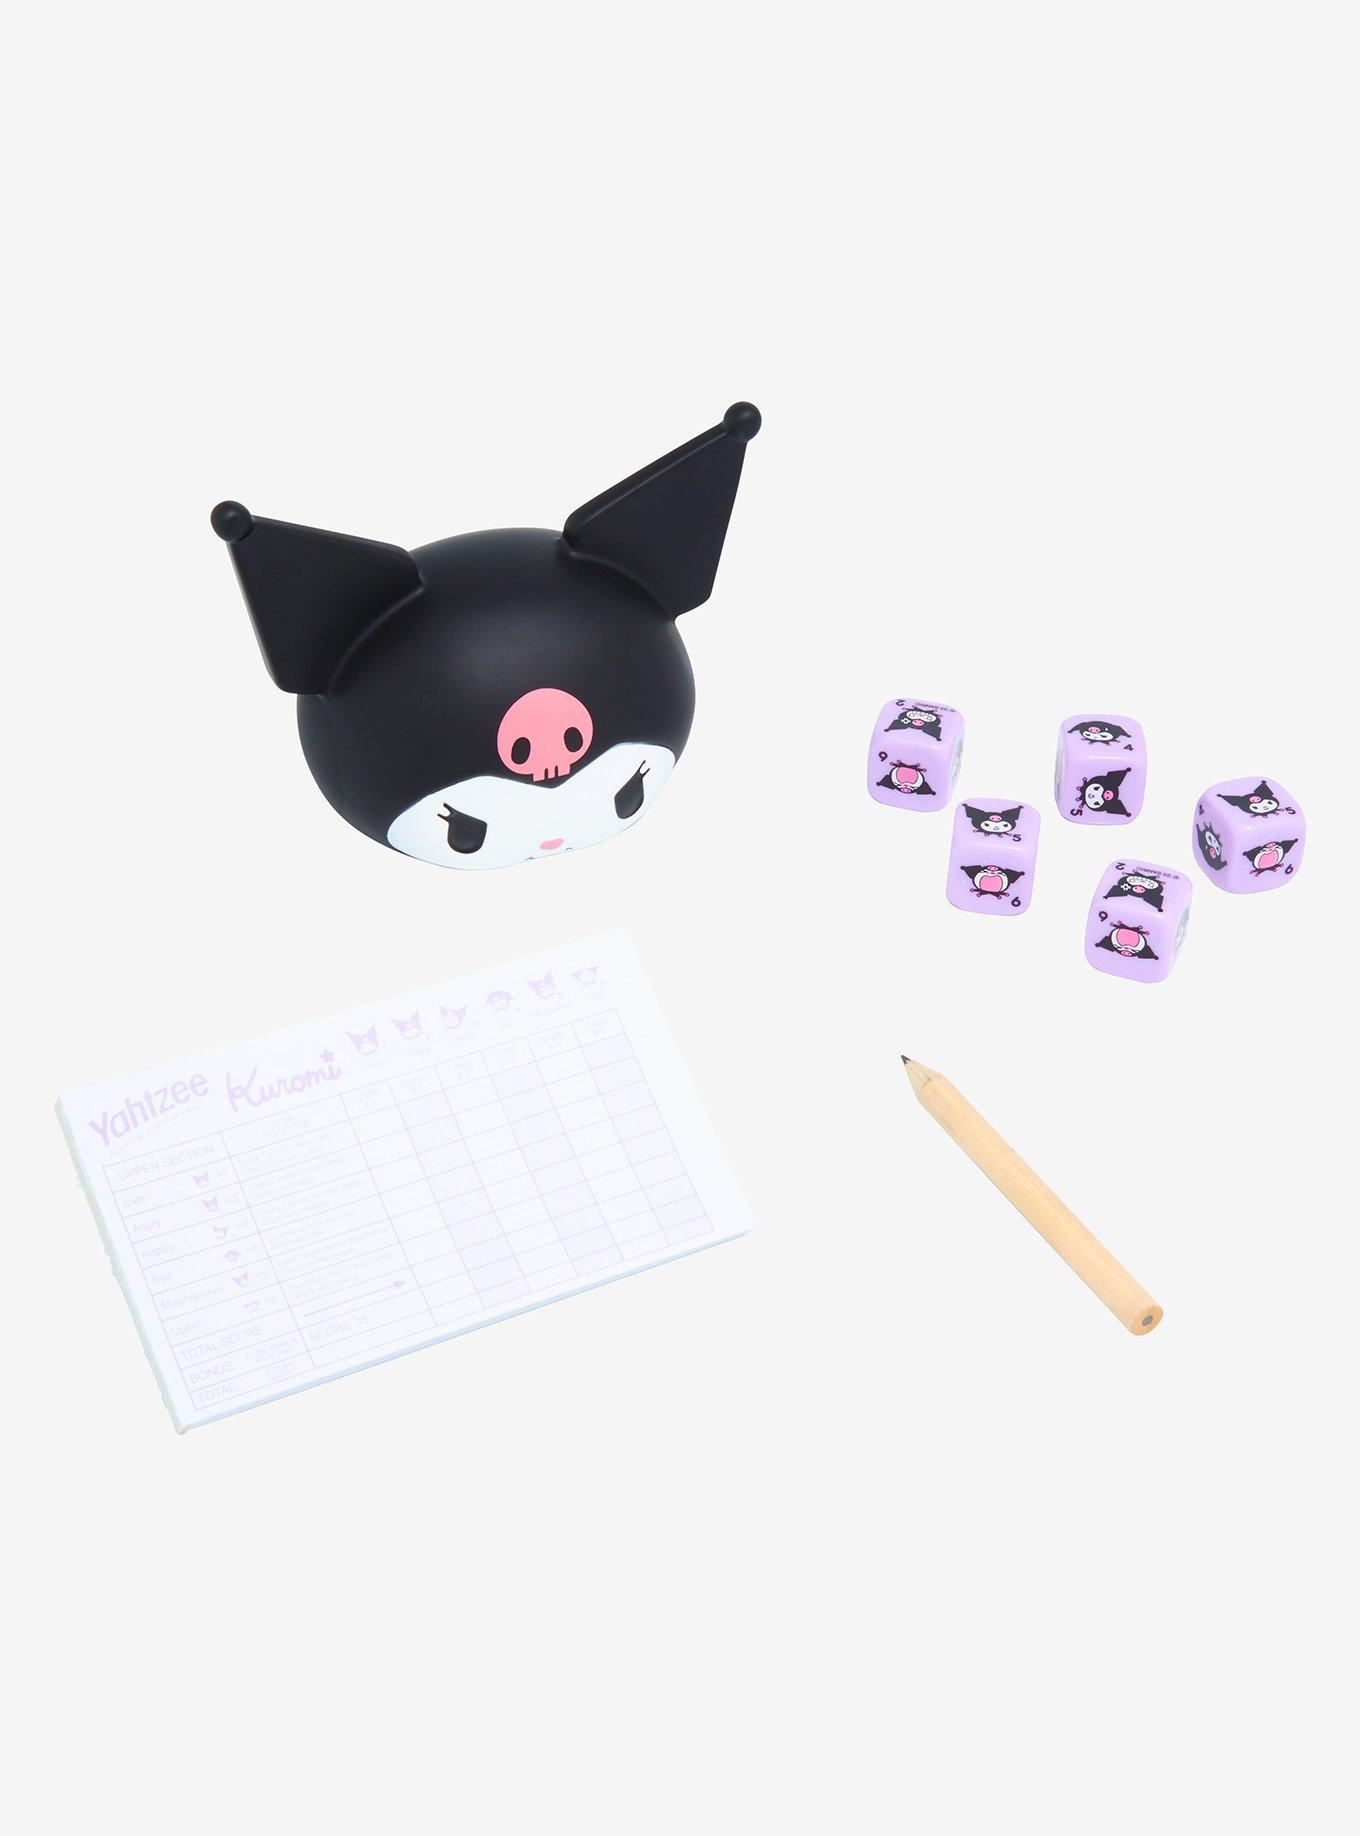 Hello Kitty And Friends Yahtzee Game Hot Topic Exclusive